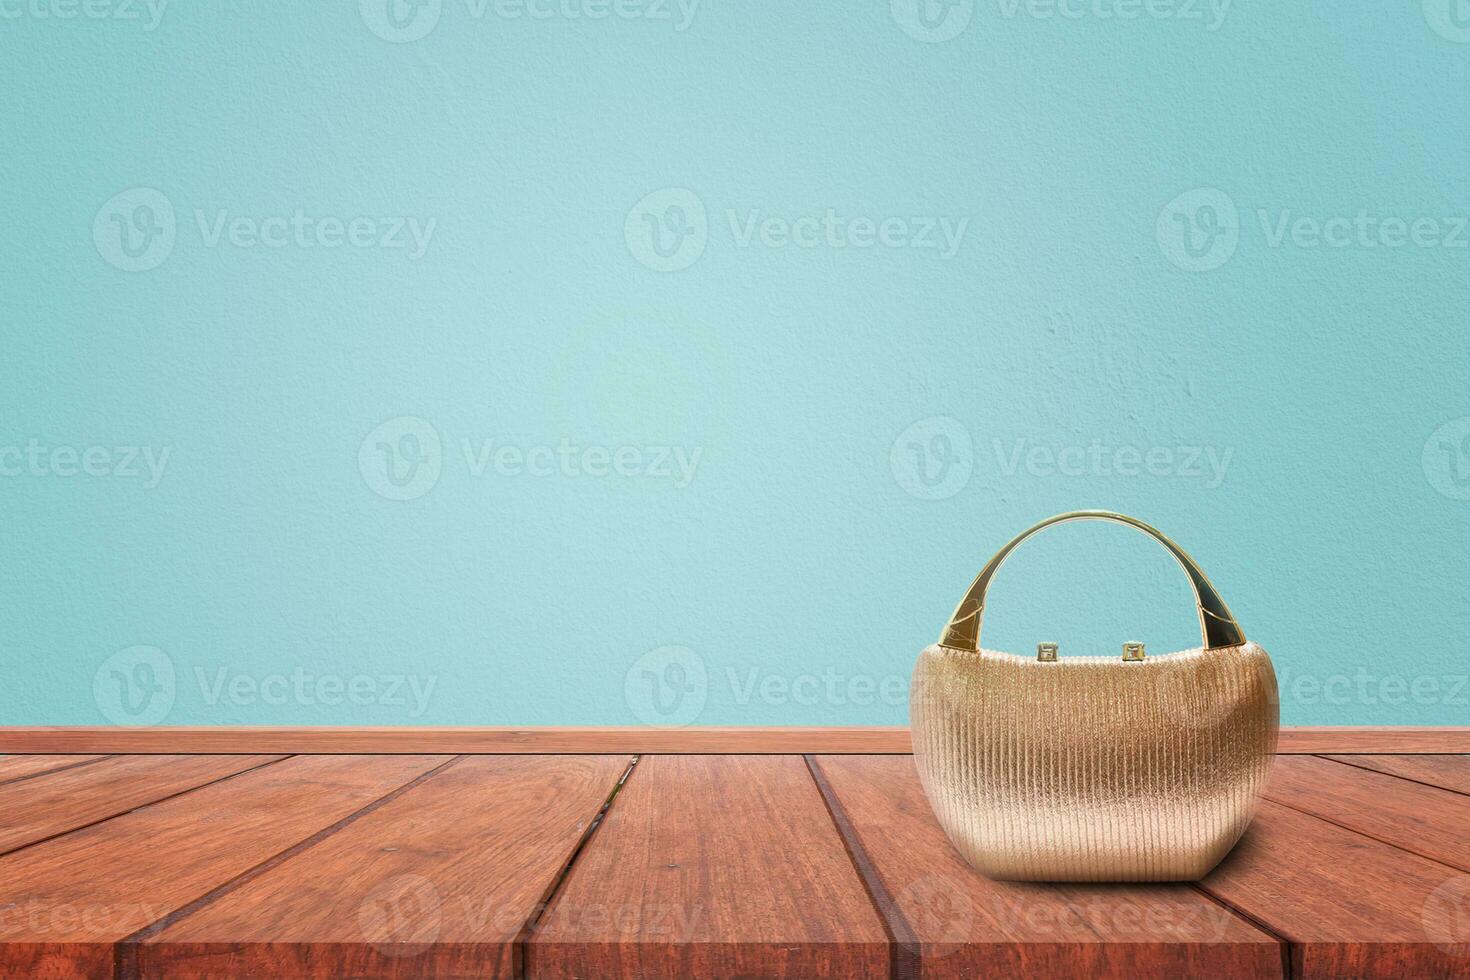 Women's handbag on wooden table with blue background. photo